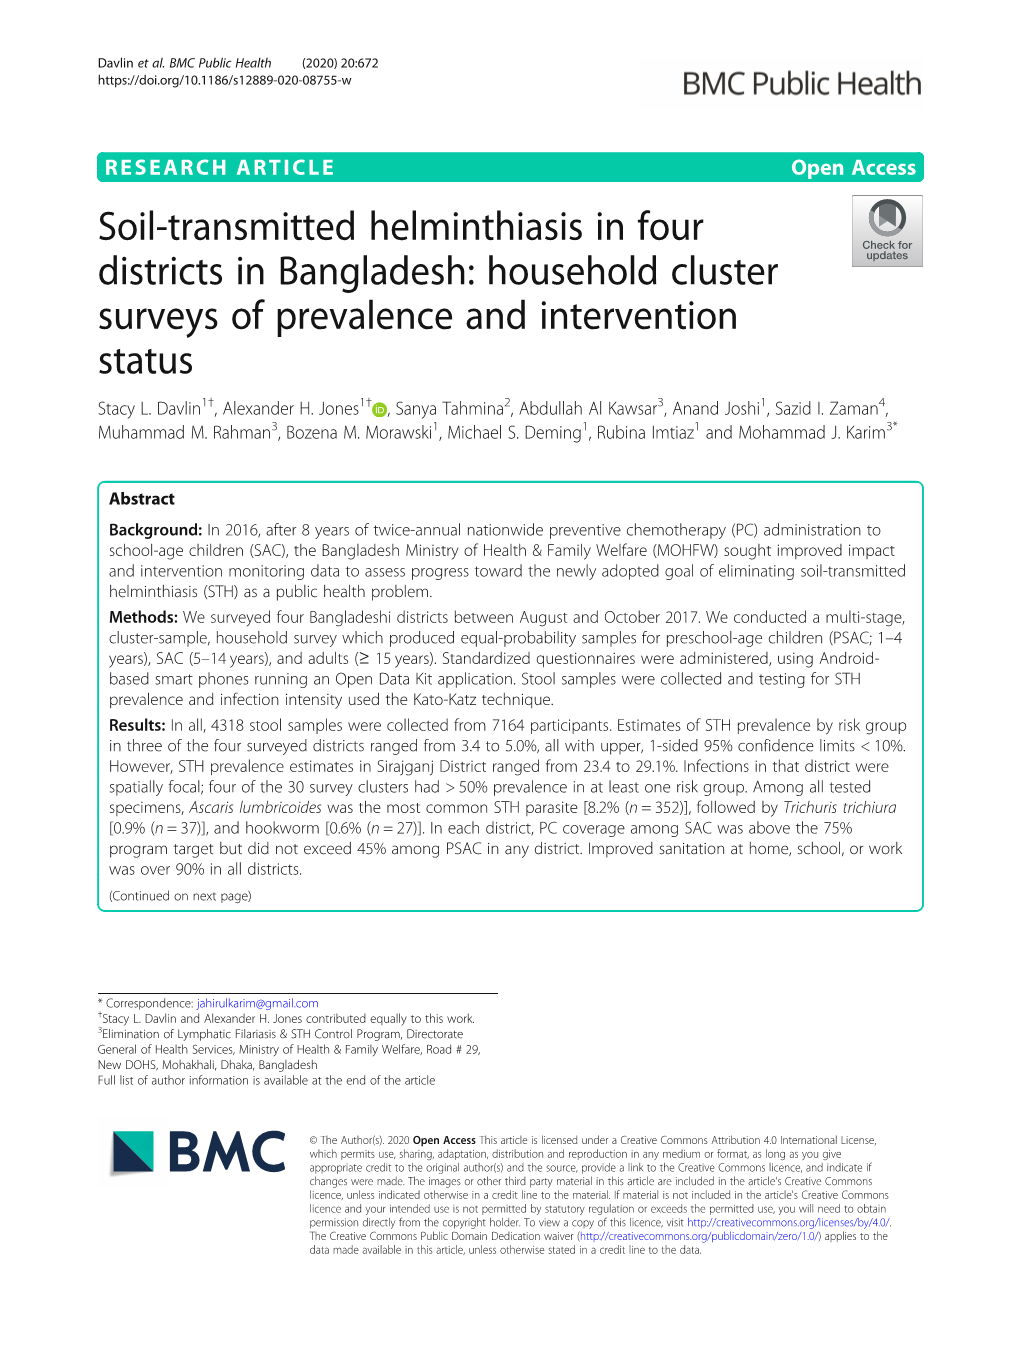 Soil-Transmitted Helminthiasis in Four Districts in Bangladesh: Household Cluster Surveys of Prevalence and Intervention Status Stacy L